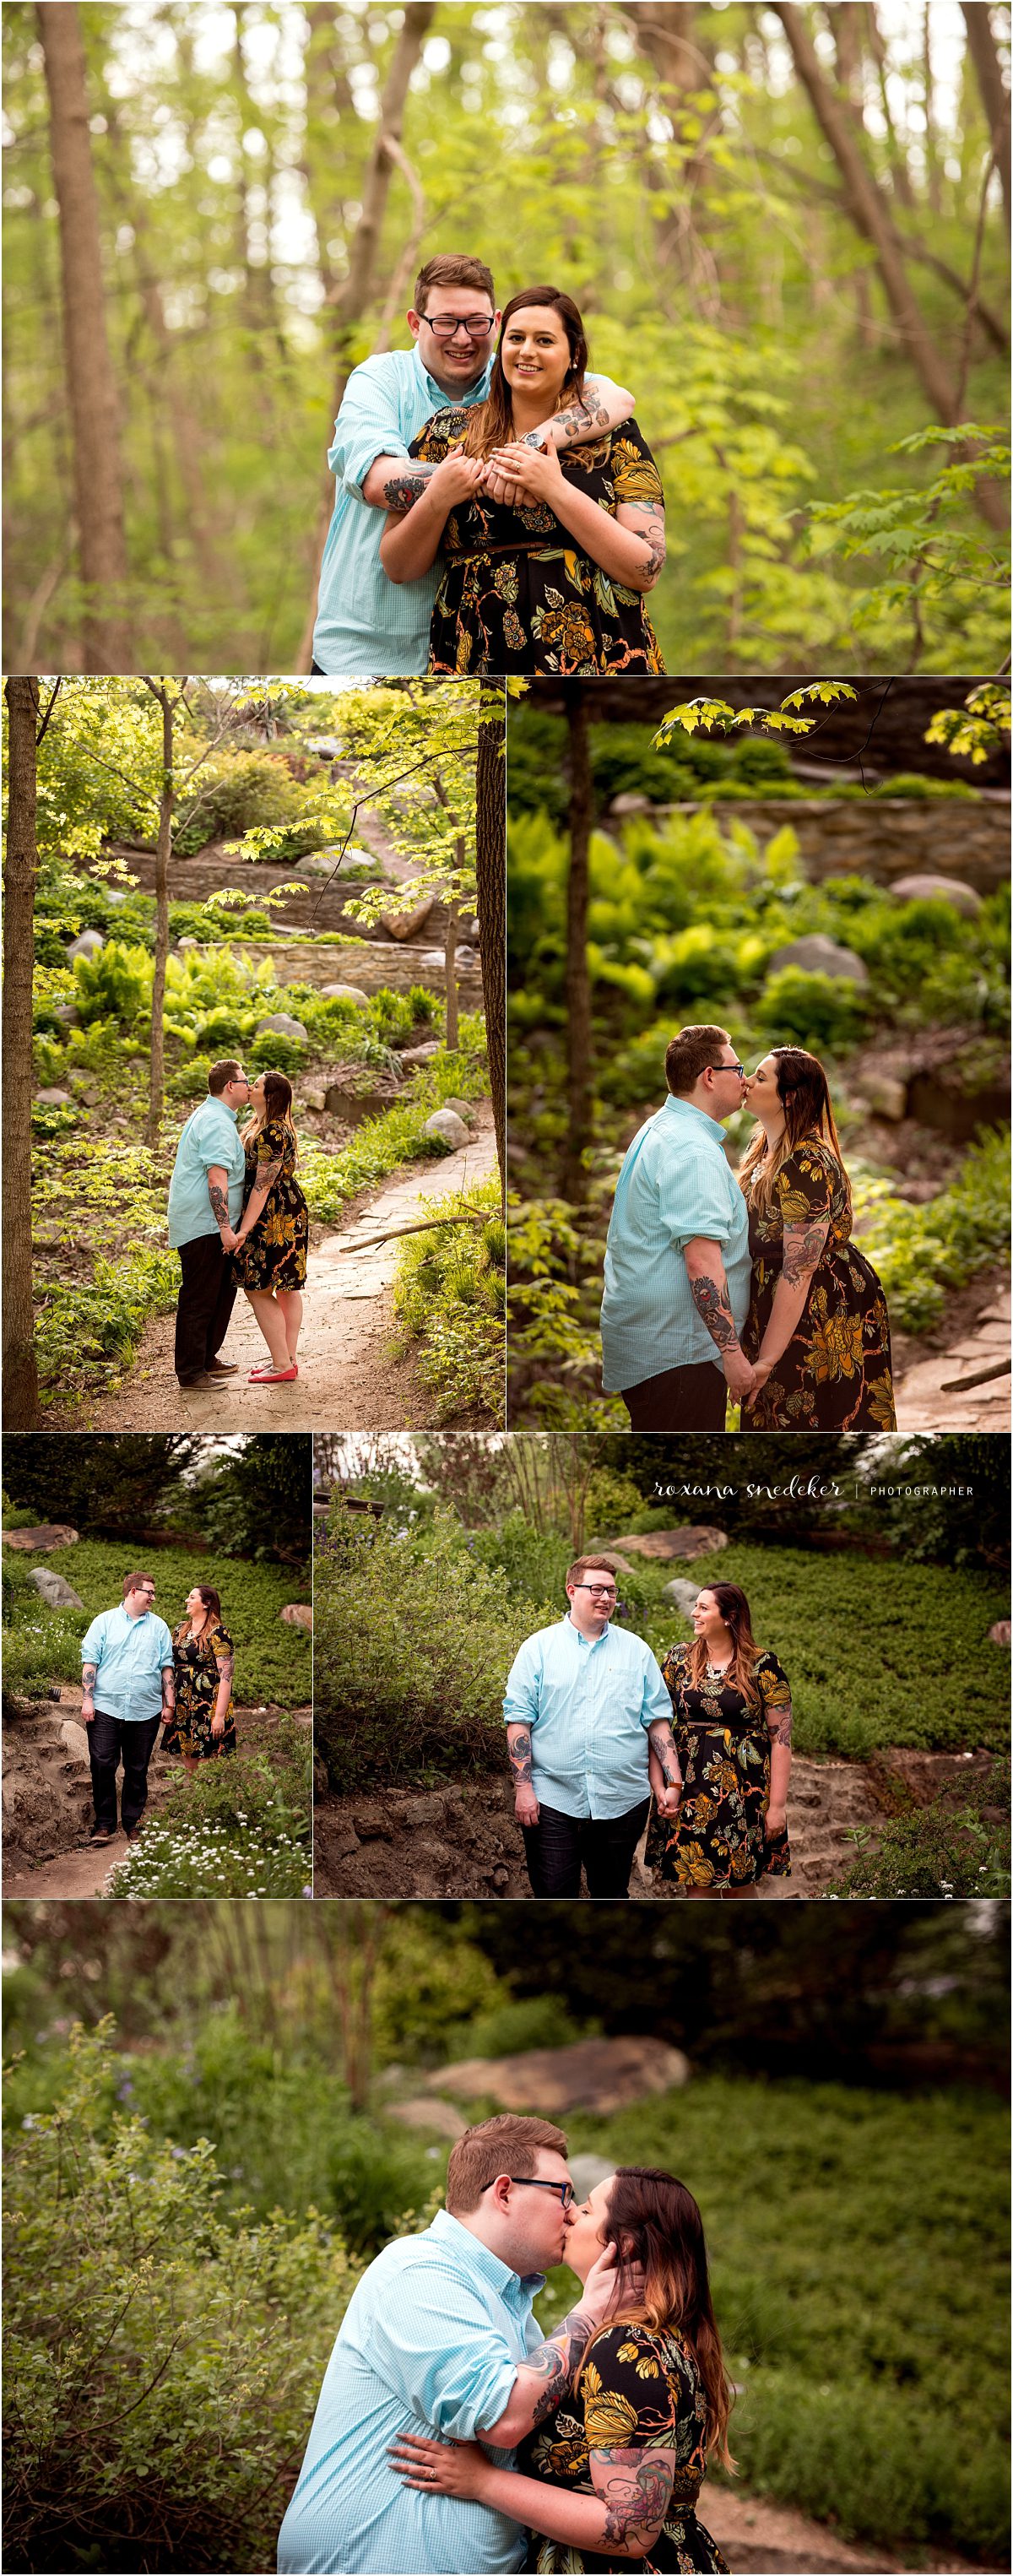 Holliday Park Engagement Session Indianapolis, Indiana